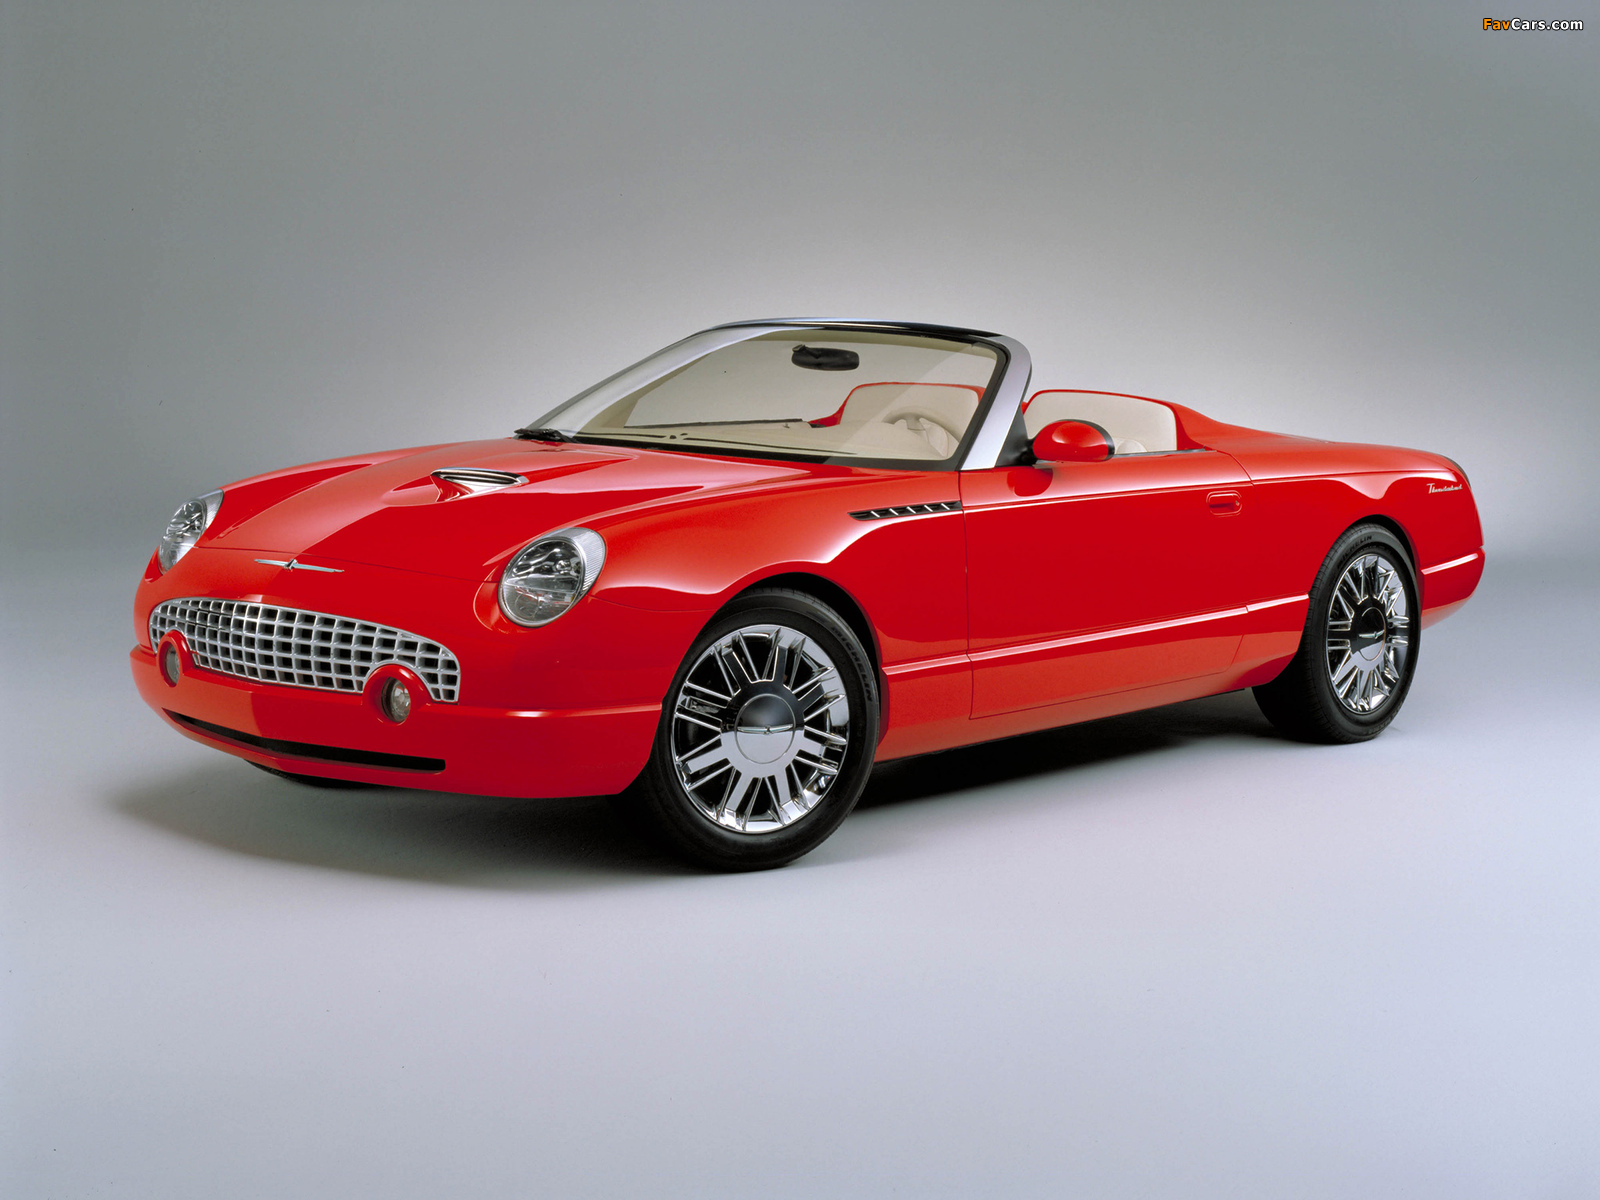 Ford Thunderbird Sports Roadster Concept 2001 pictures (1600 x 1200)